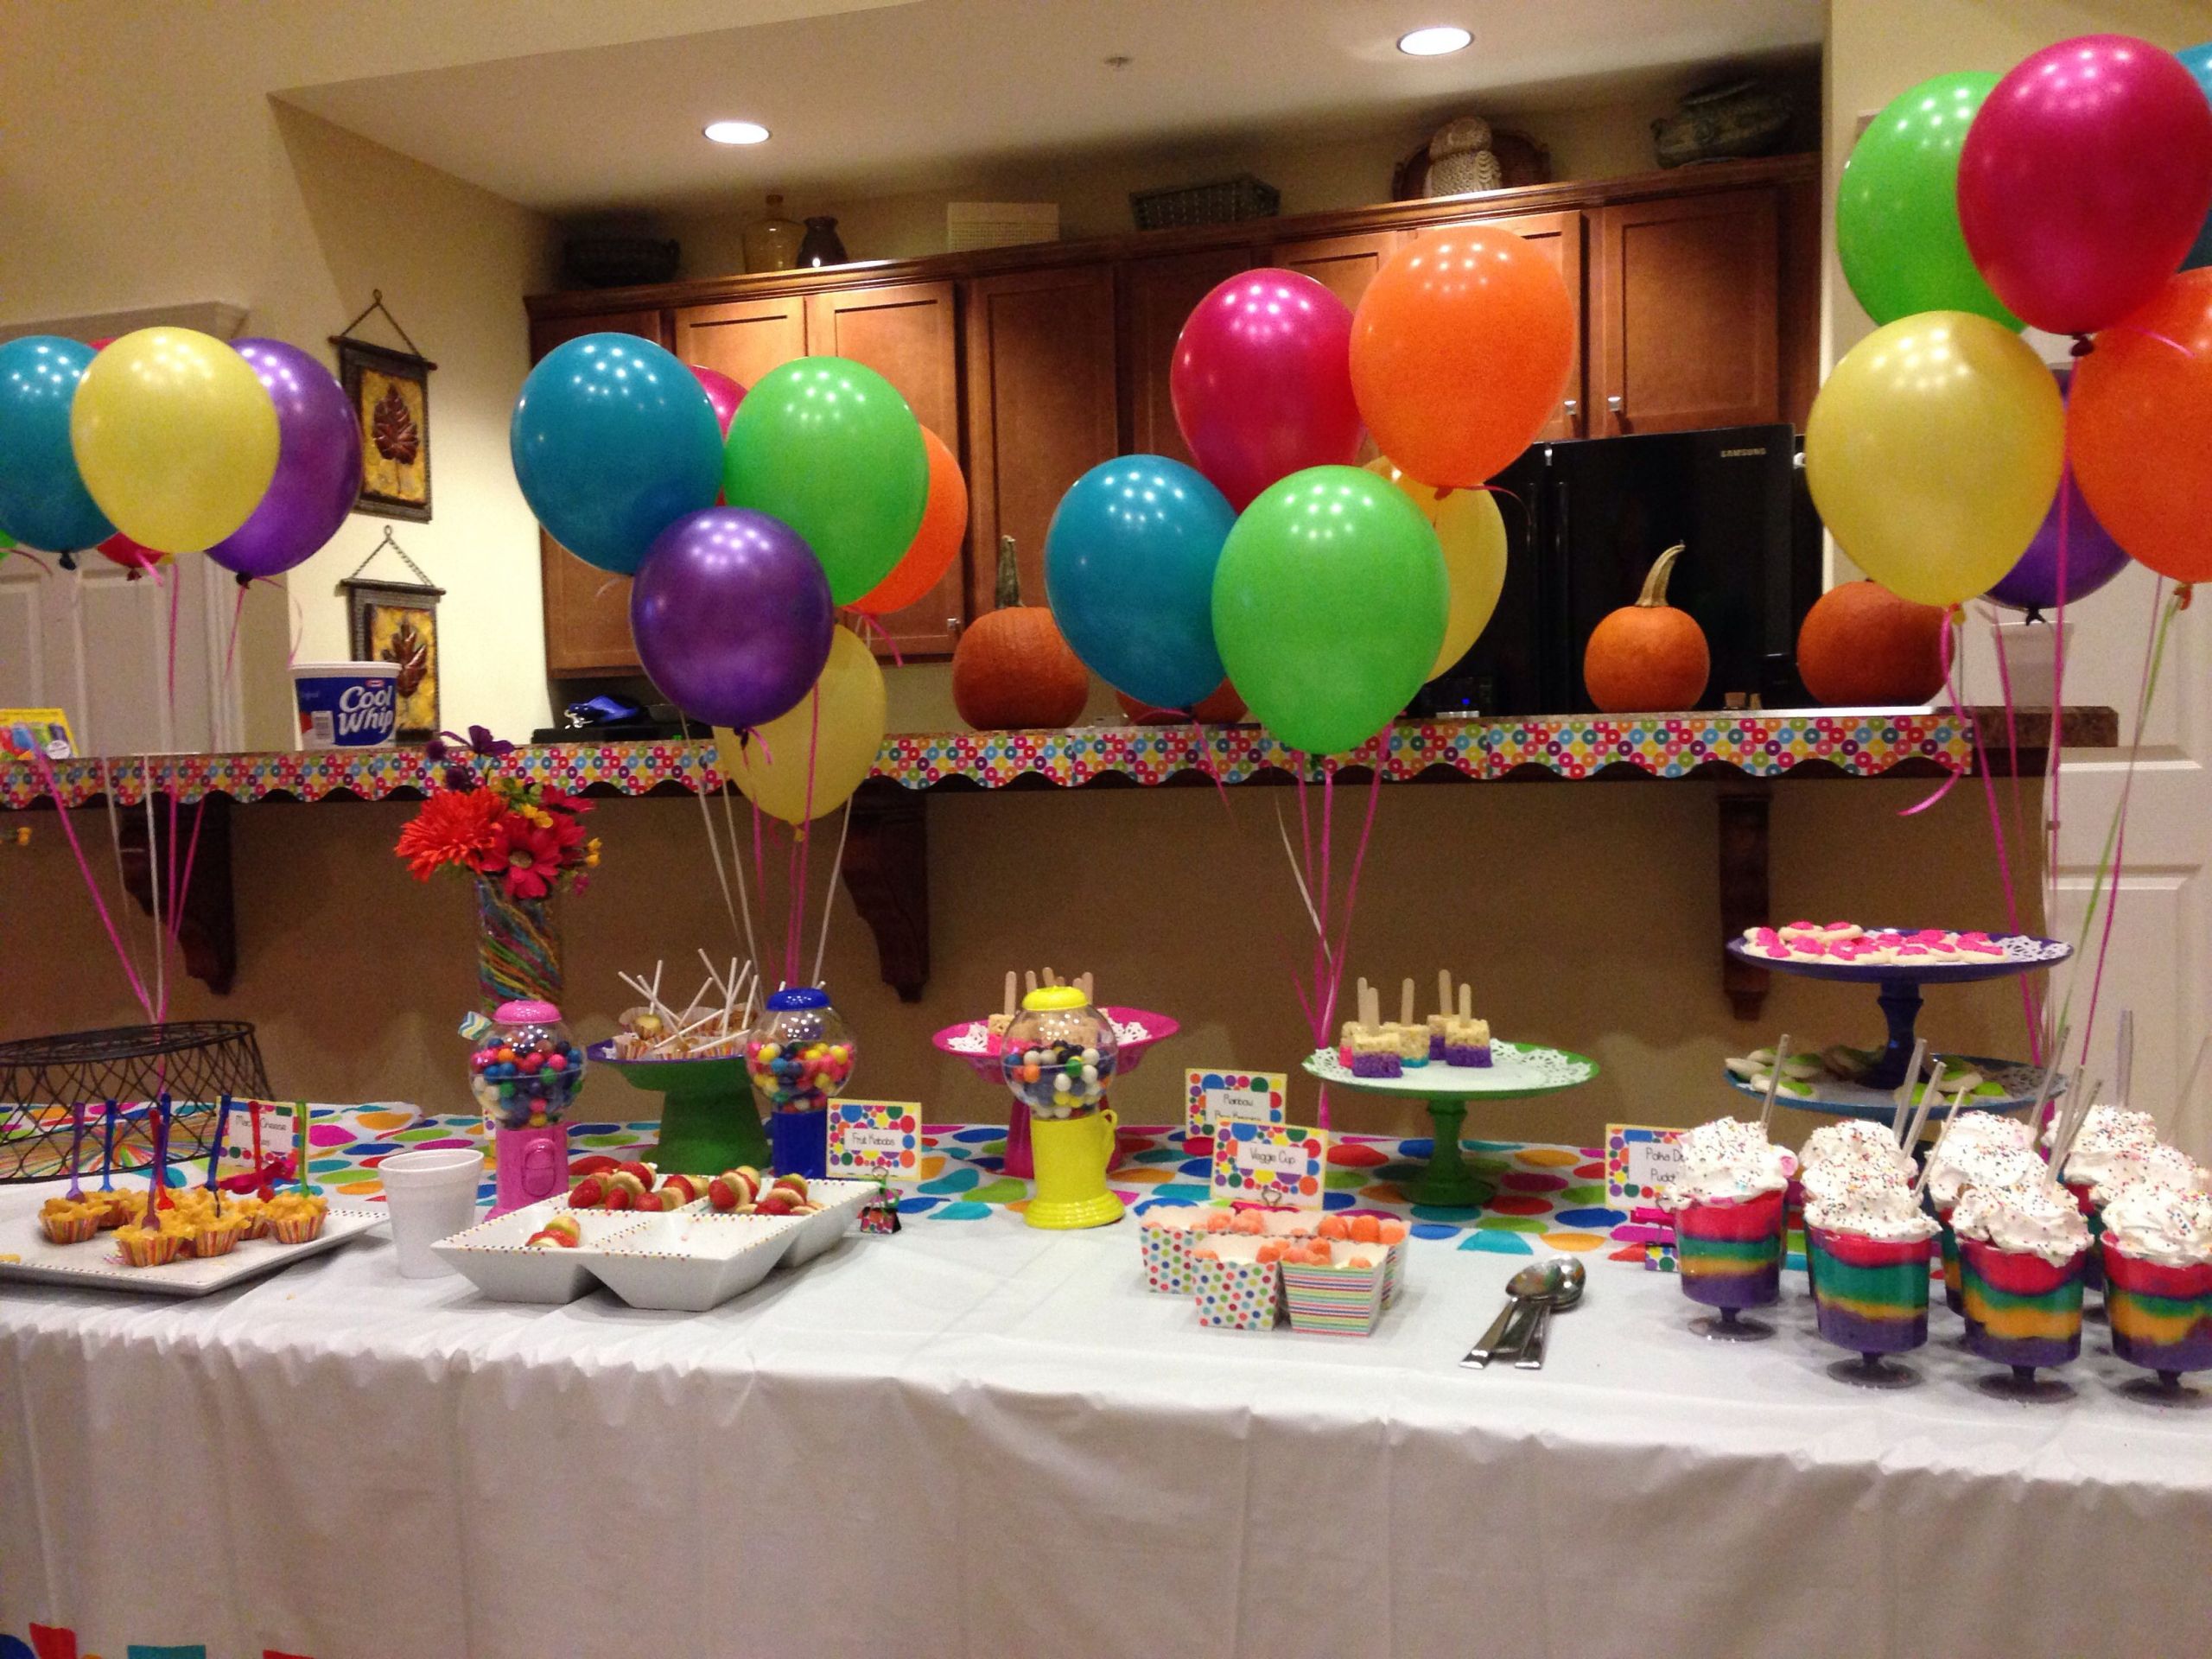 4 Year Old Little Girl Birthday Party Ideas
 4 Year Old Birthday Party Ideas